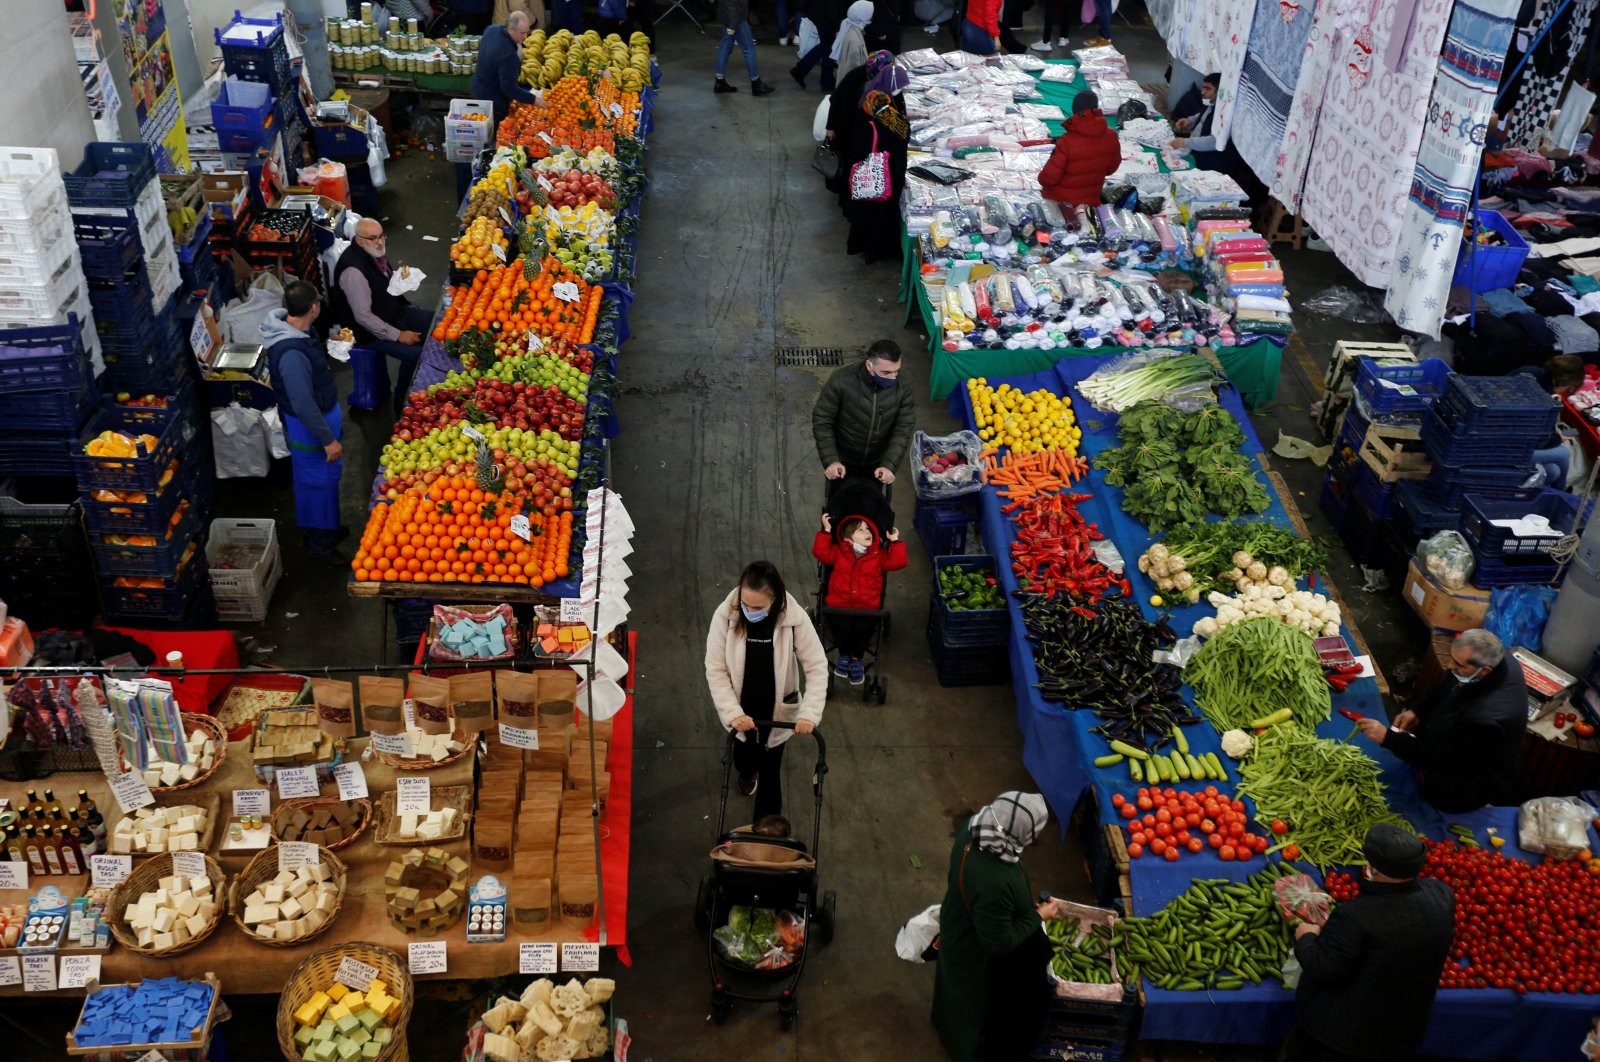 People shop at an open market in Istanbul, Turkey, Jan. 4, 2022. (Reuters Photo)